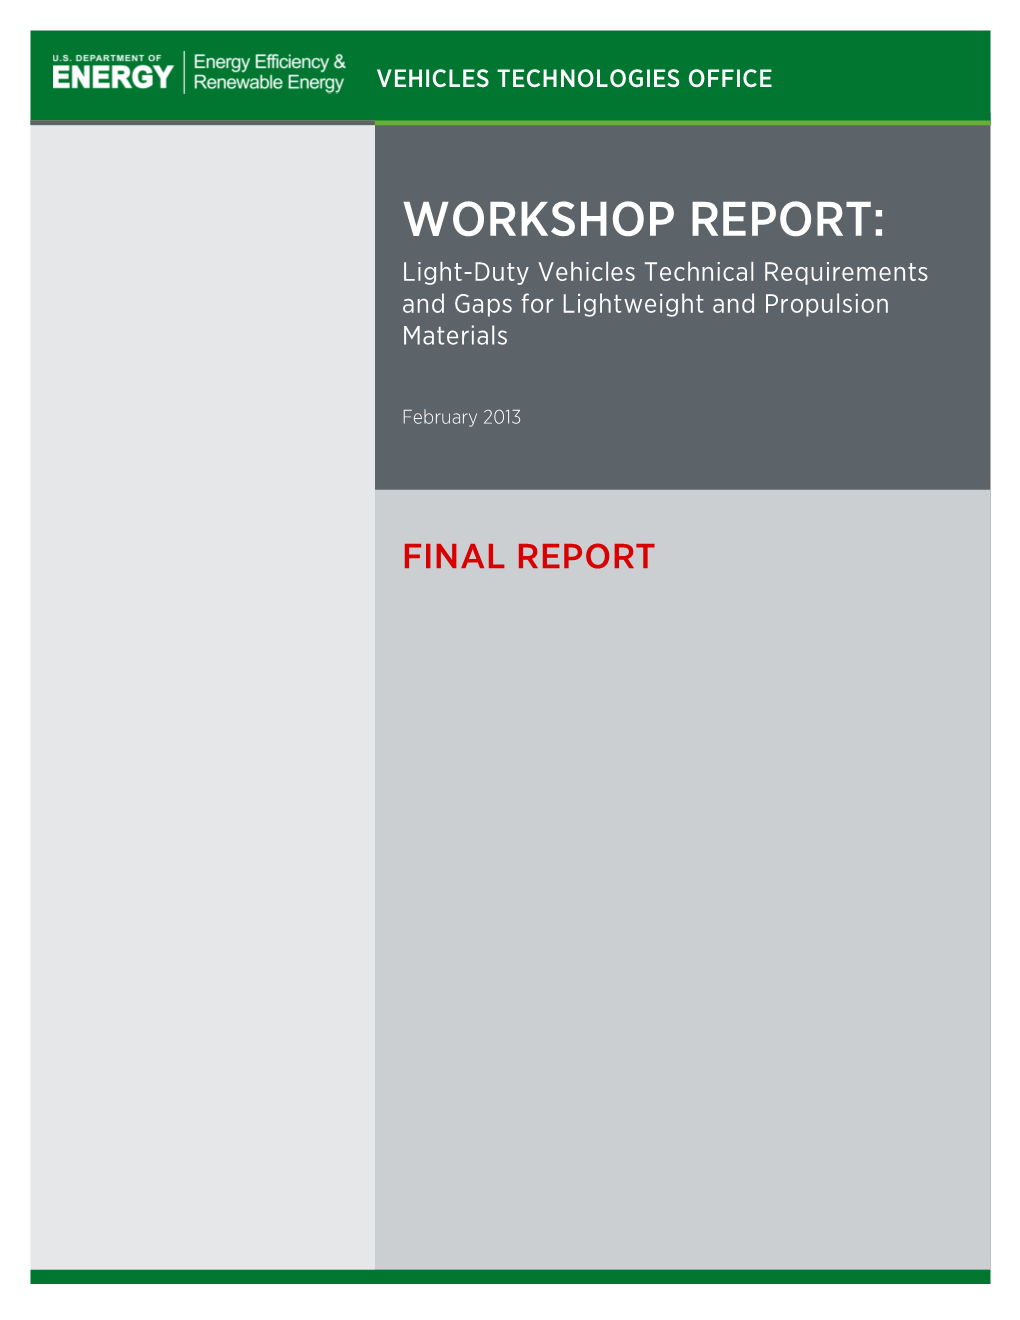 WORKSHOP REPORT:Light-Duty Vehicles Technical Requirements